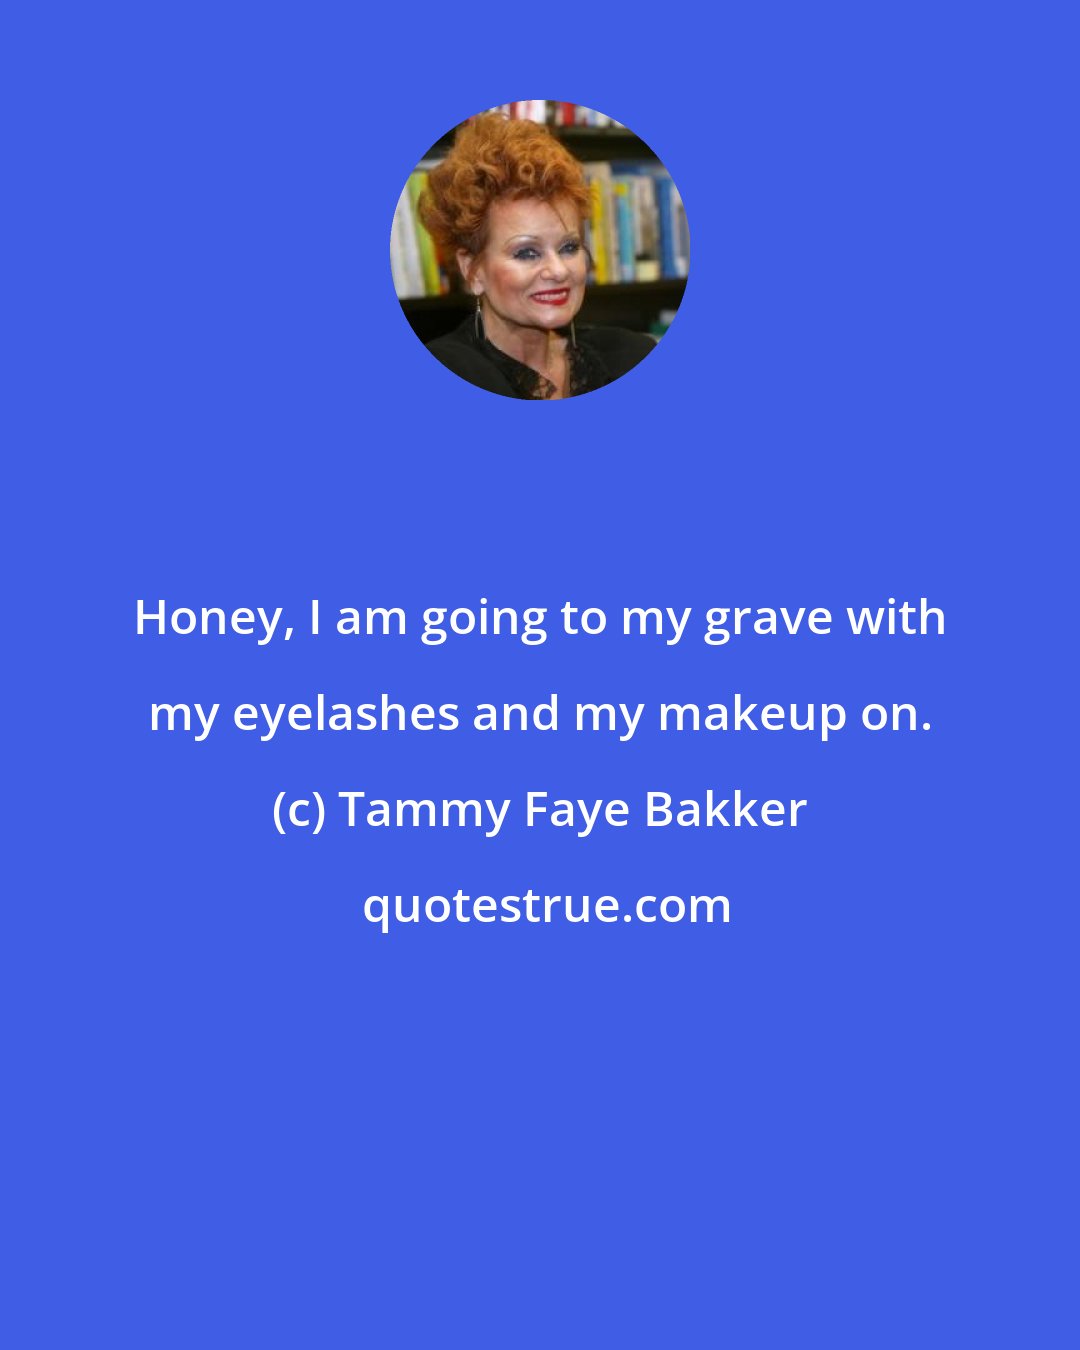 Tammy Faye Bakker: Honey, I am going to my grave with my eyelashes and my makeup on.